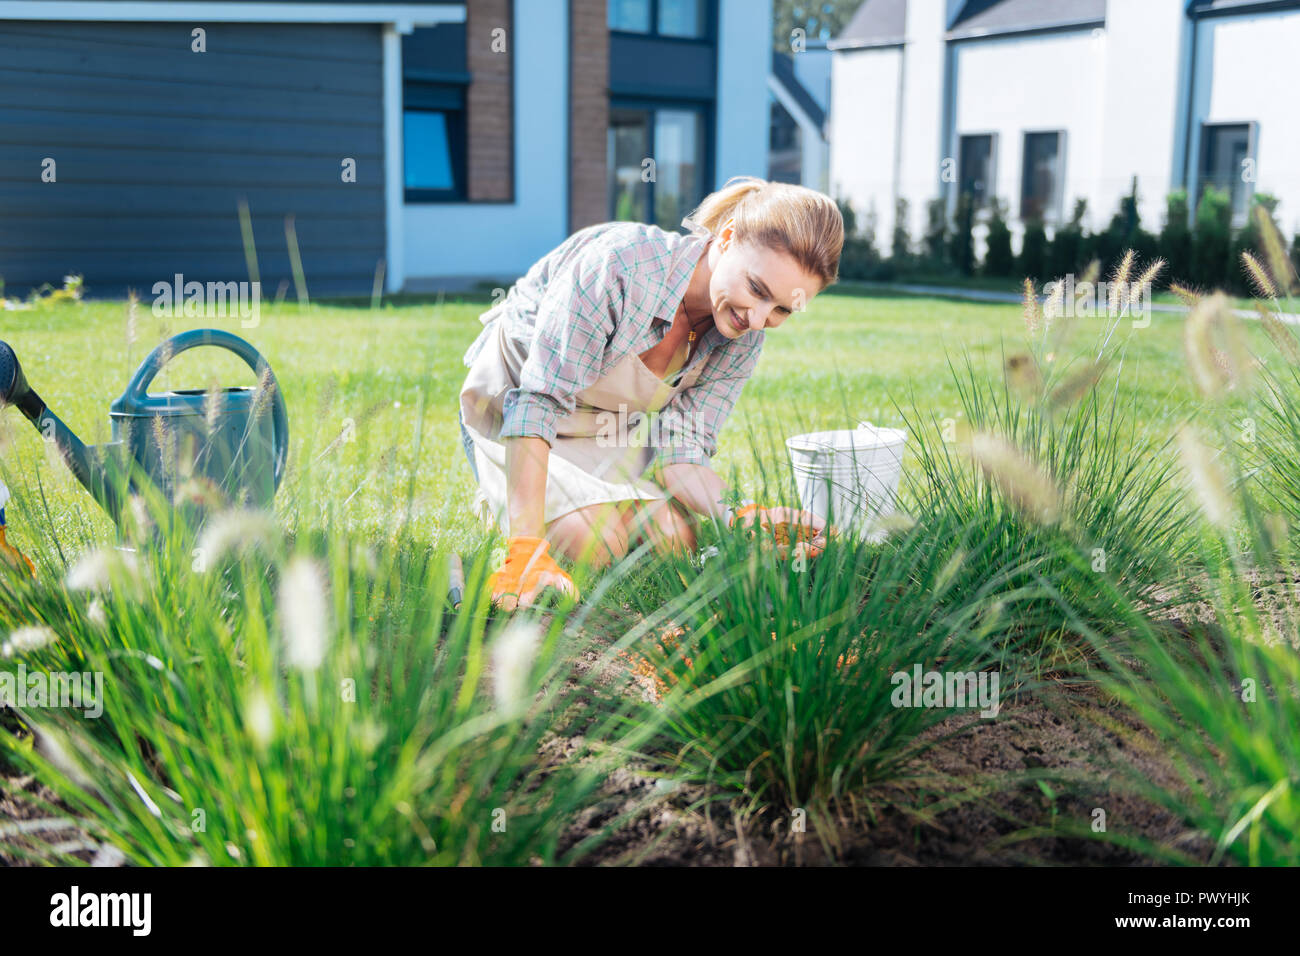 Woman looking at her garden bed while supporting sustainable environment Stock Photo